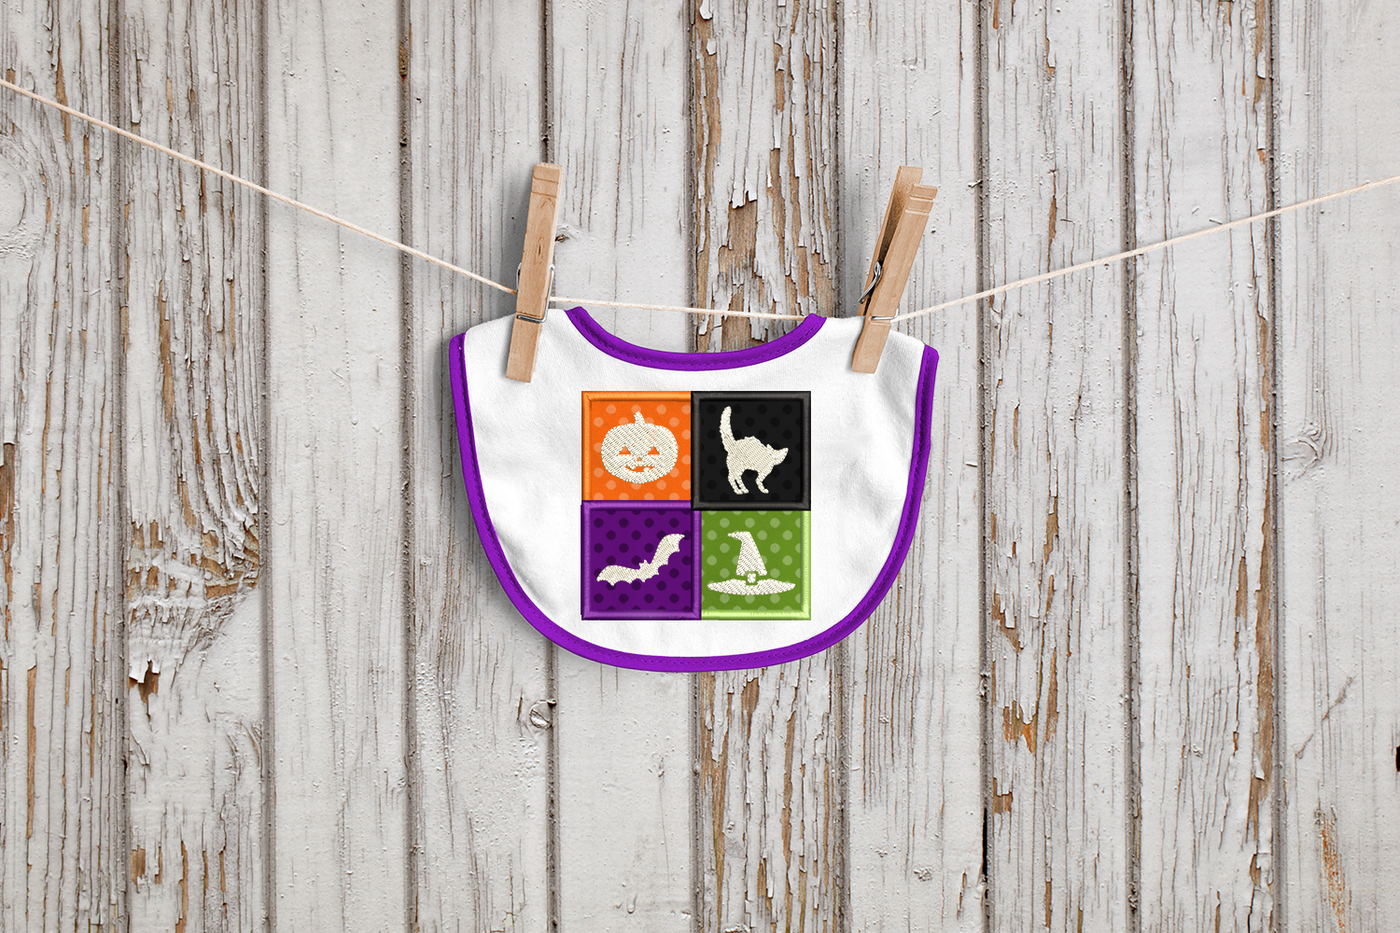 Bib with 4 applique squares in different Halloween colors. In the middle of each square is a white embroidered design: a carved pumpkin, scared cat, flying bat, and witch hat.